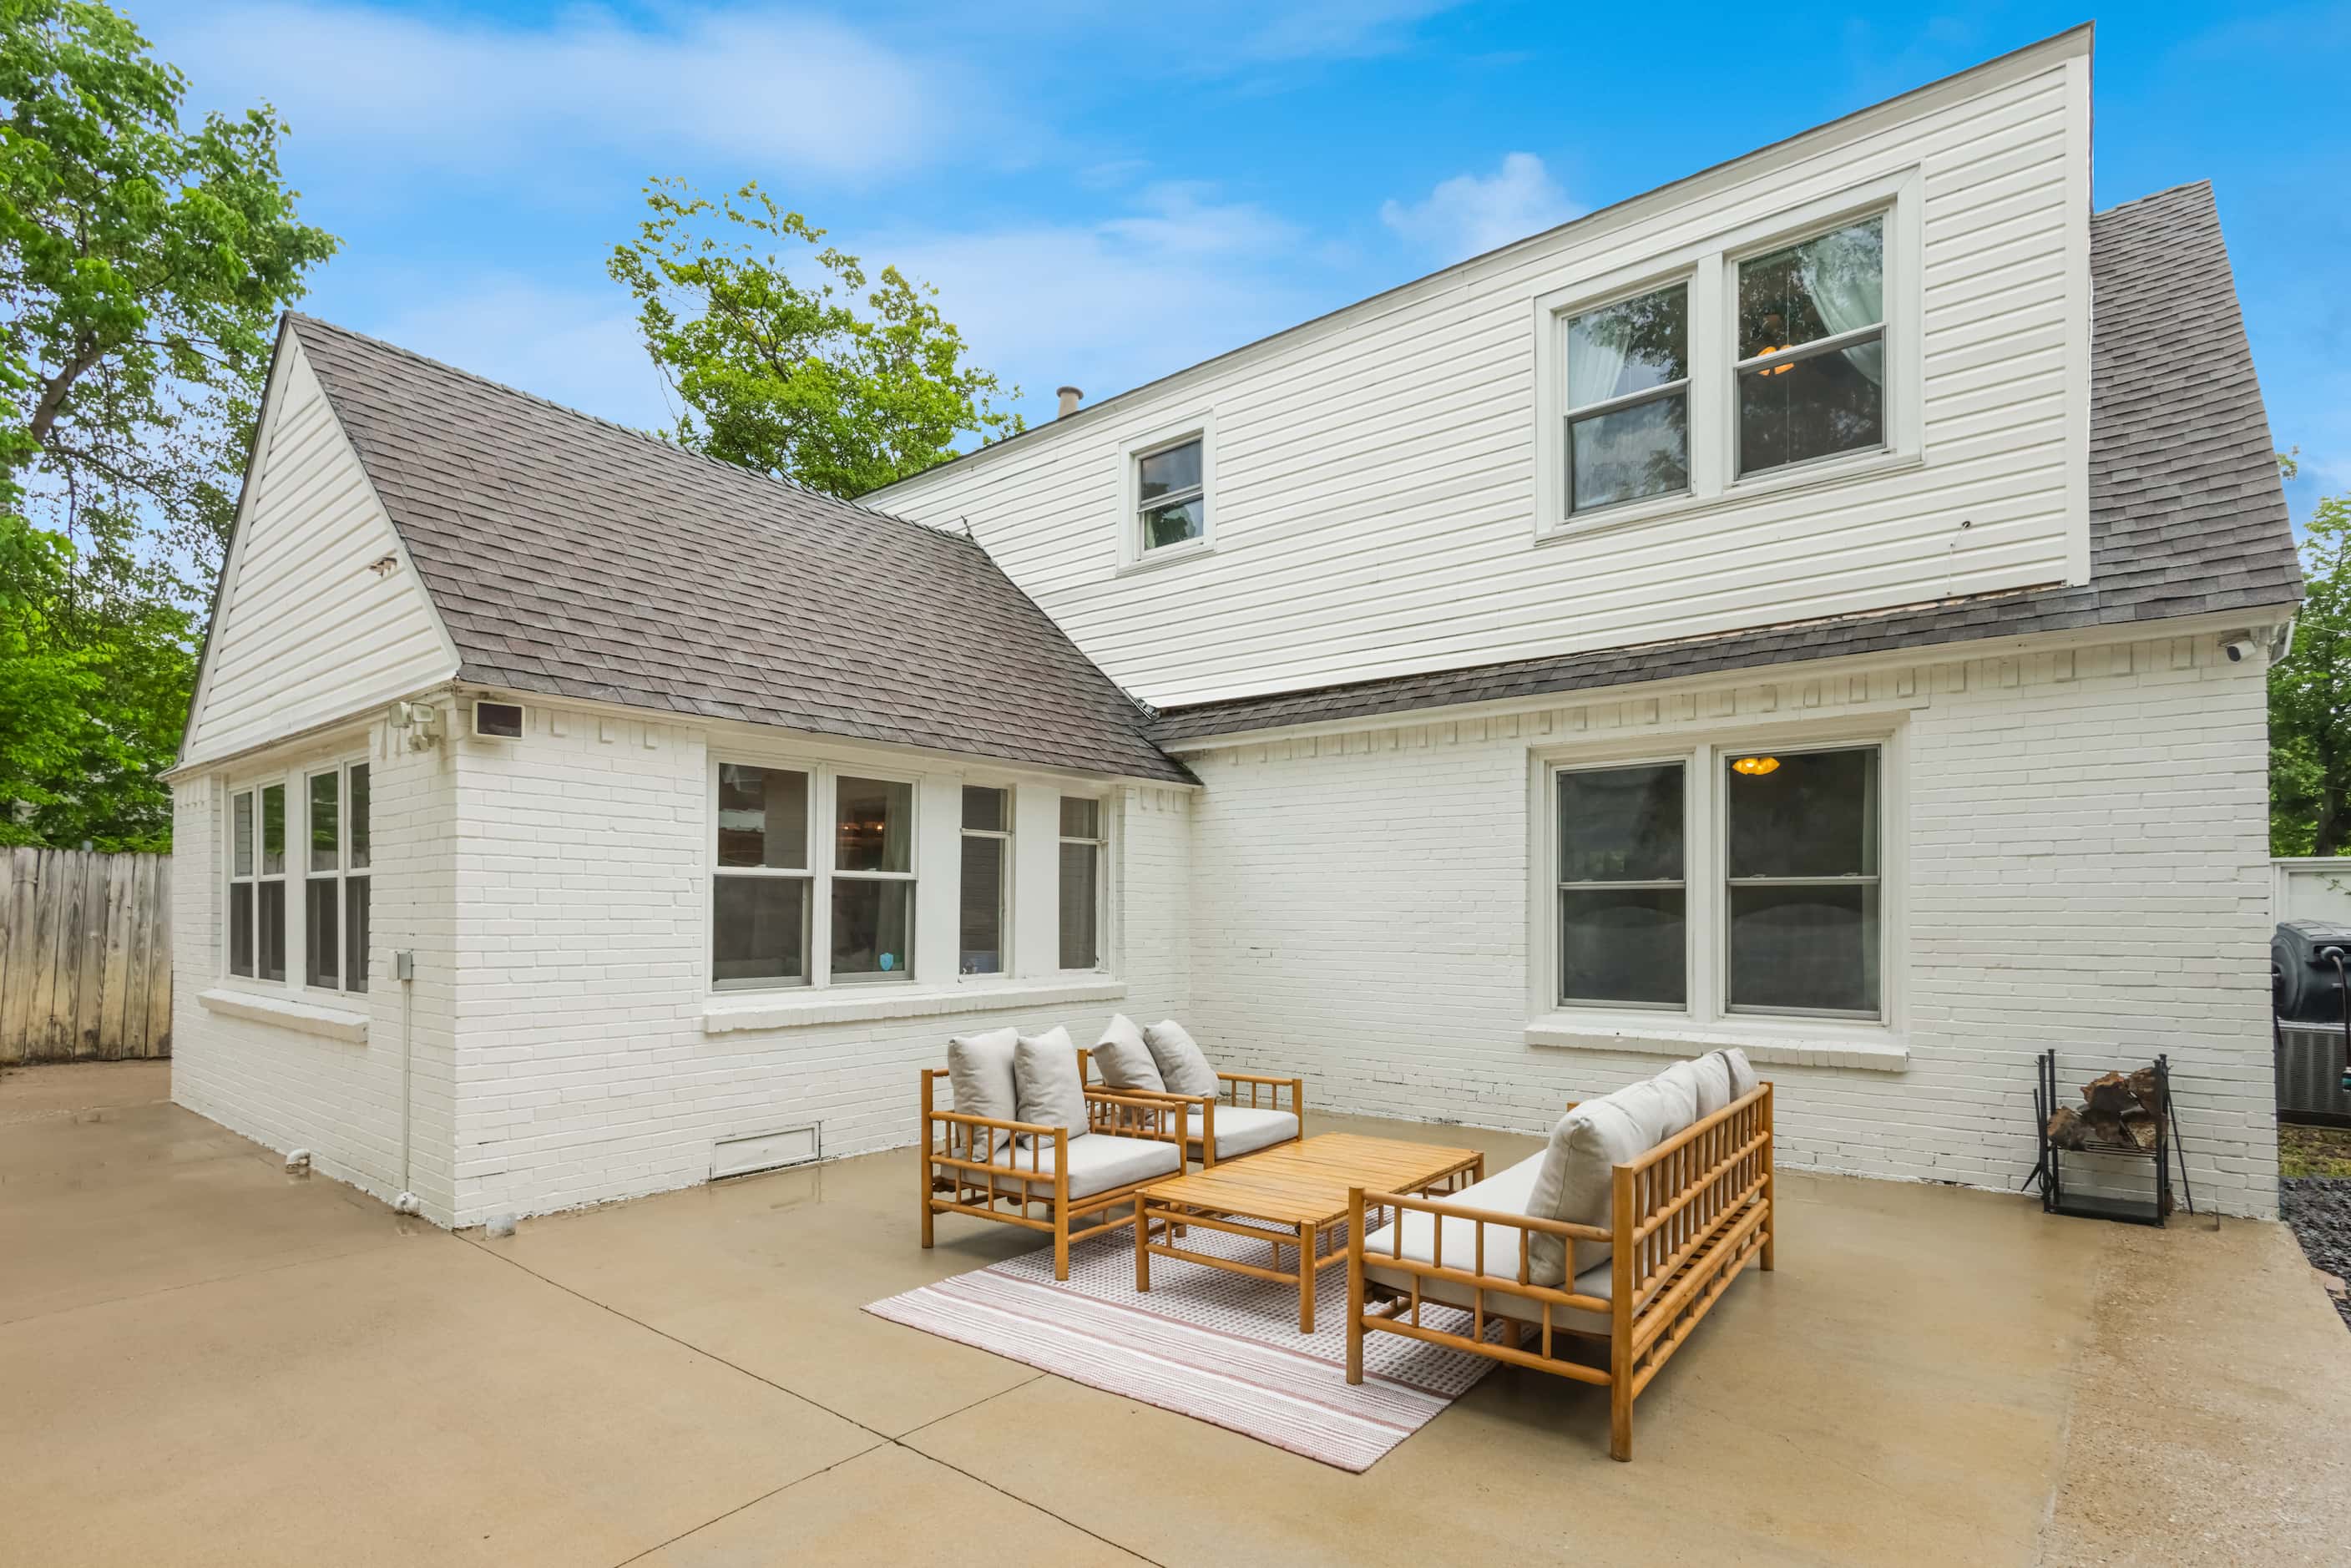 The home's fenced backyard has a large patio, plus a play area and a garage that can be...